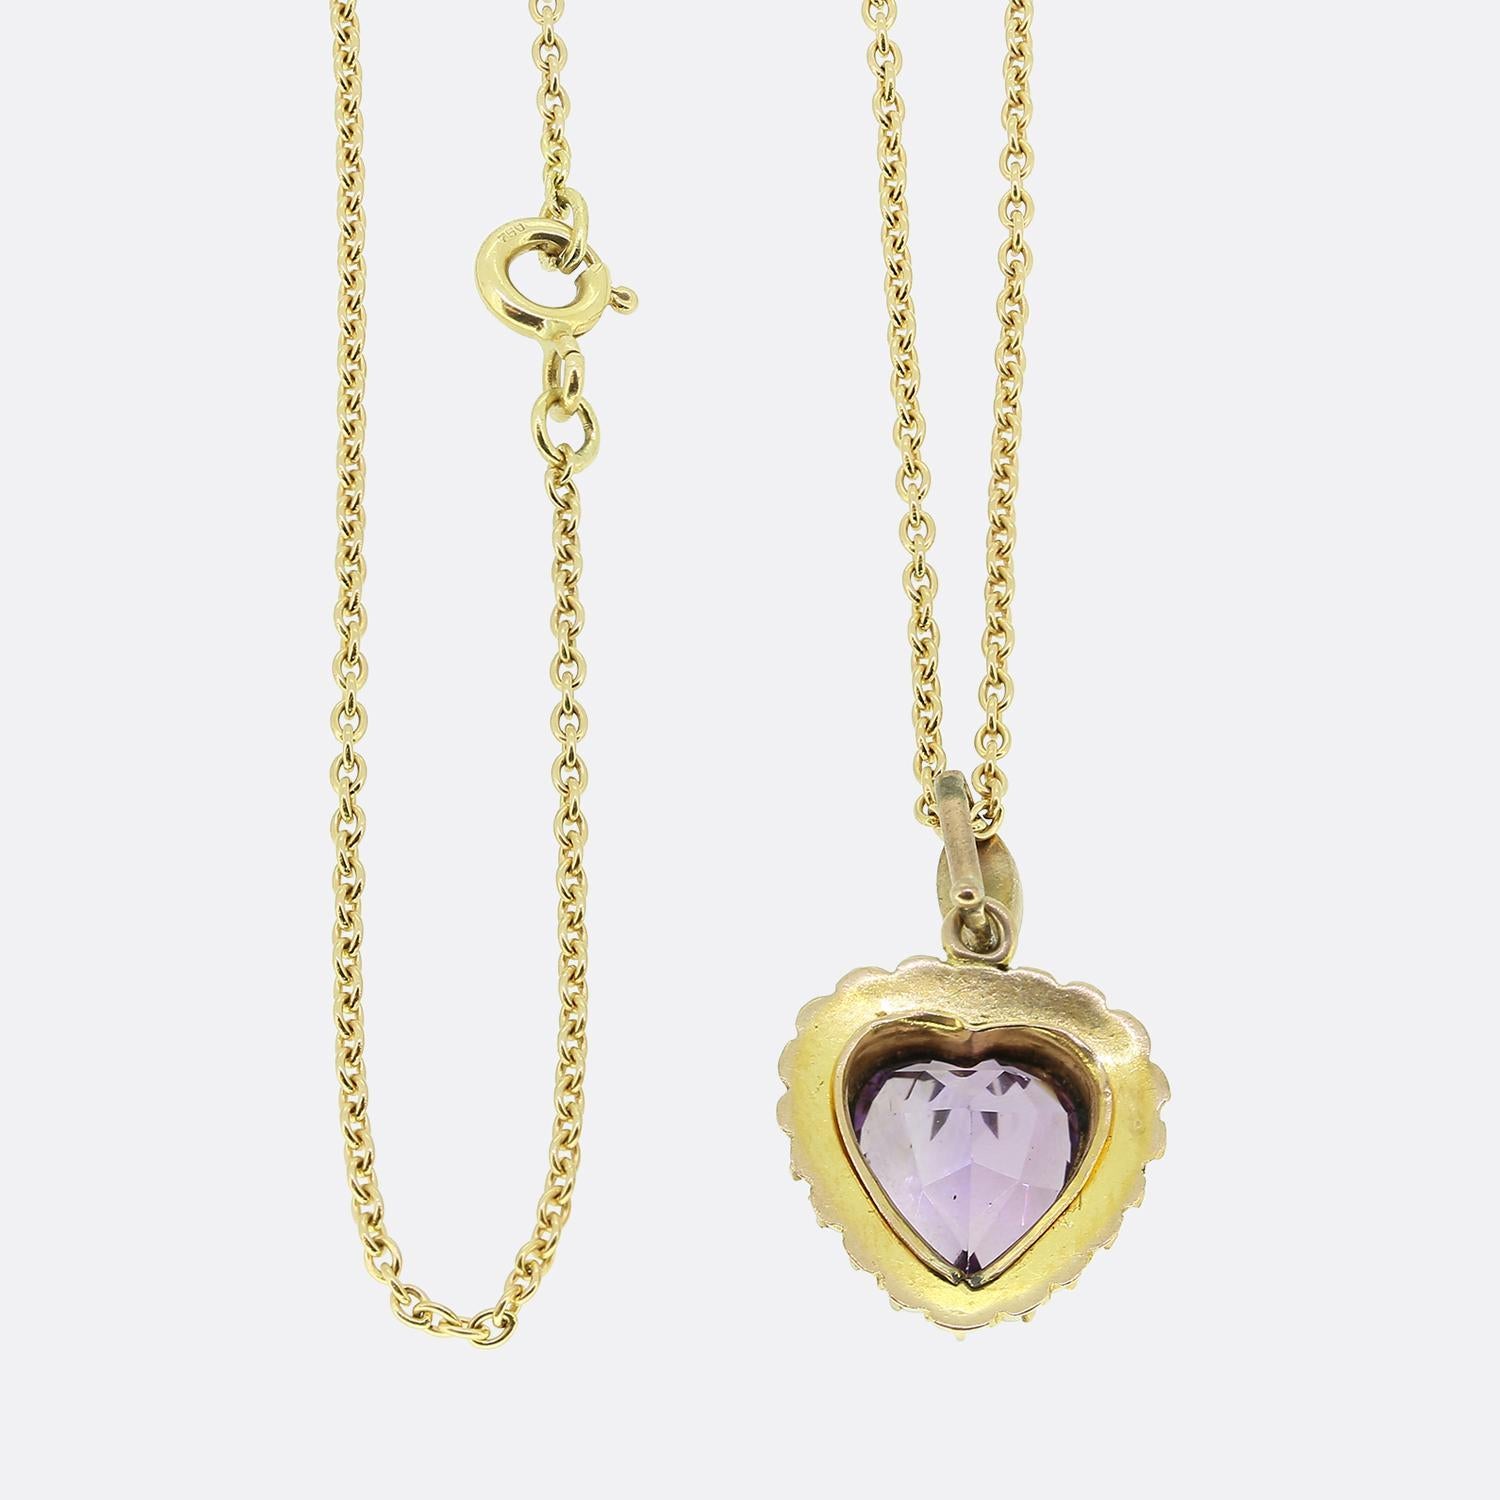 Here we have a gorgeous amethyst and pearl set pendant necklace. This antique pendant showcases an expertly crafted heart shaped amethyst possessing a stunning purple colour tone. This focal gemstone is then framed by a single row of perfectly